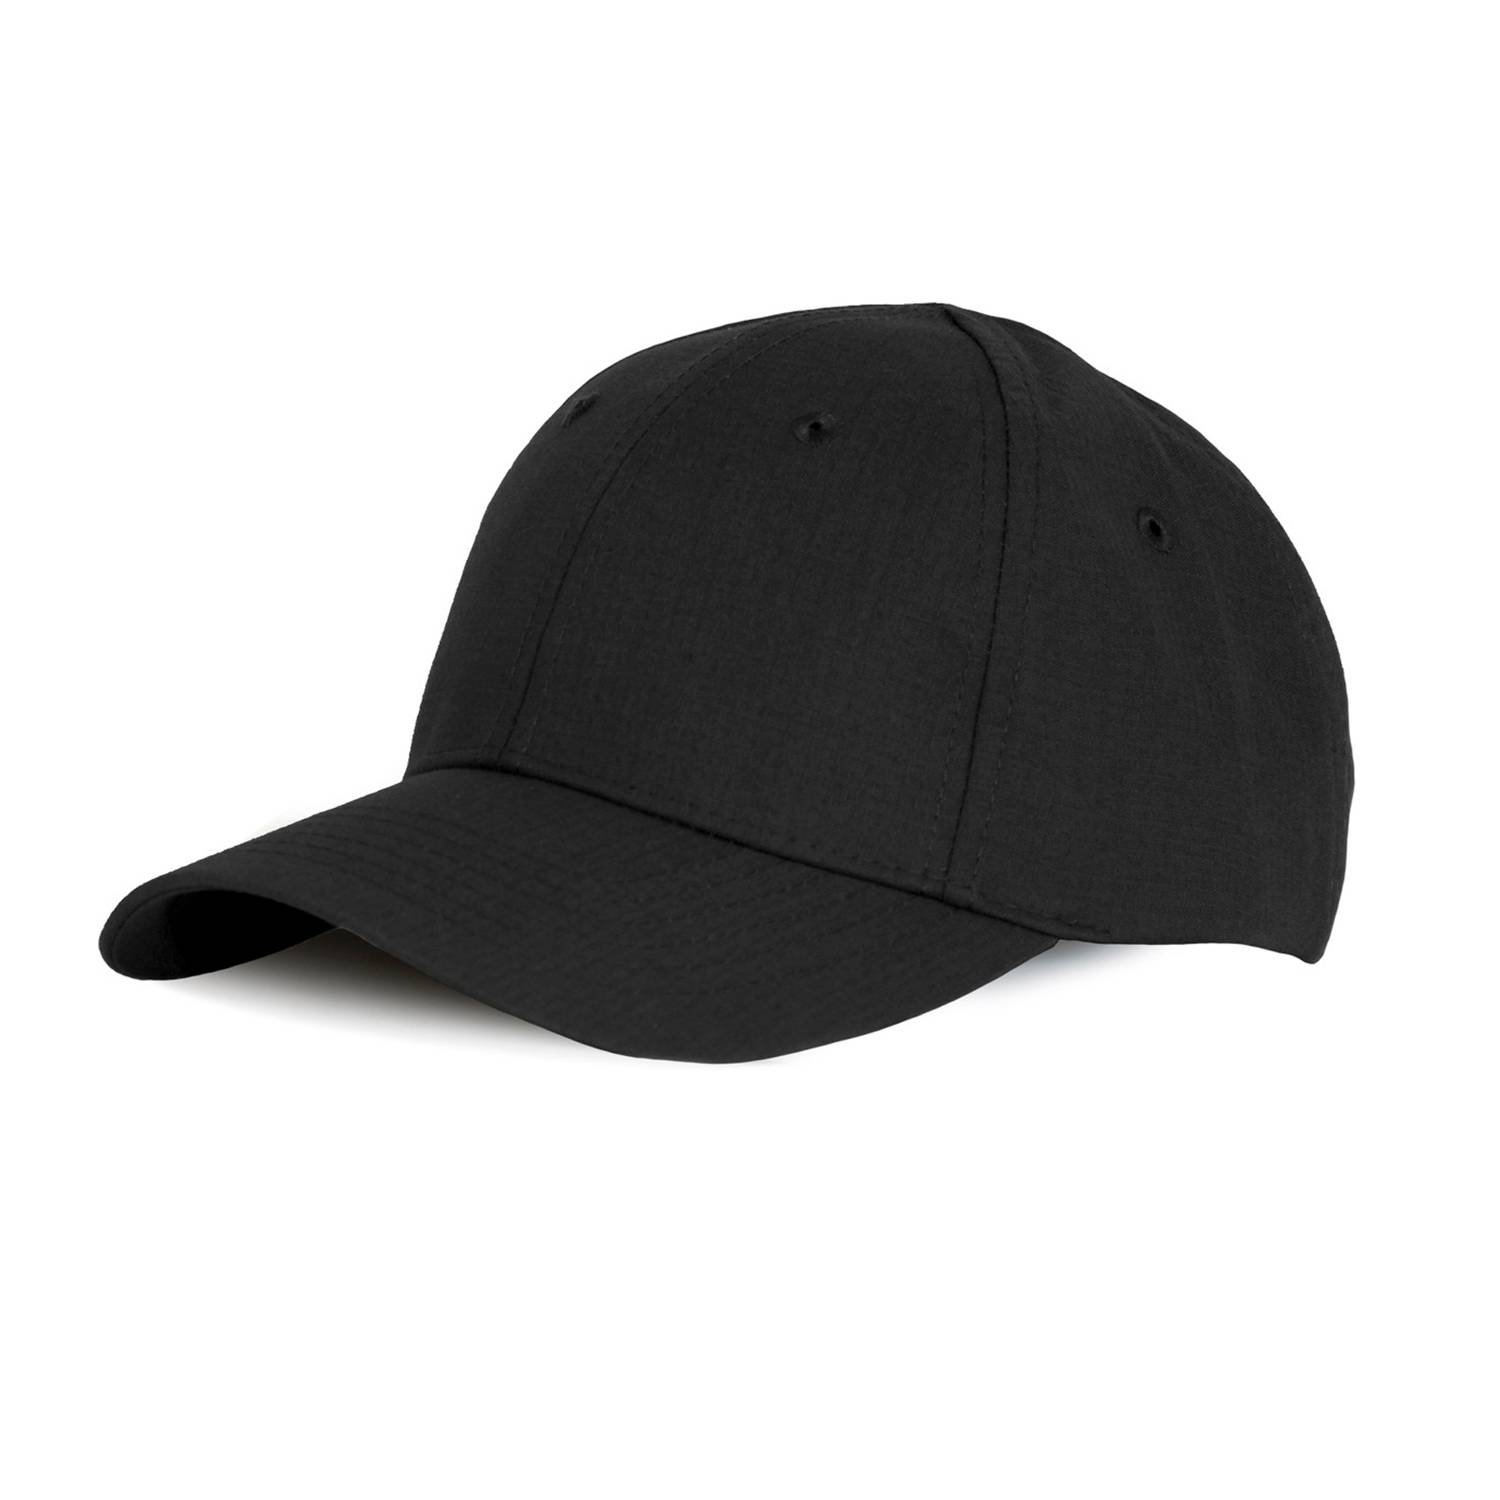 FIRST TACTICAL ADJUSTABLE BLANK CONTRACTOR CAP